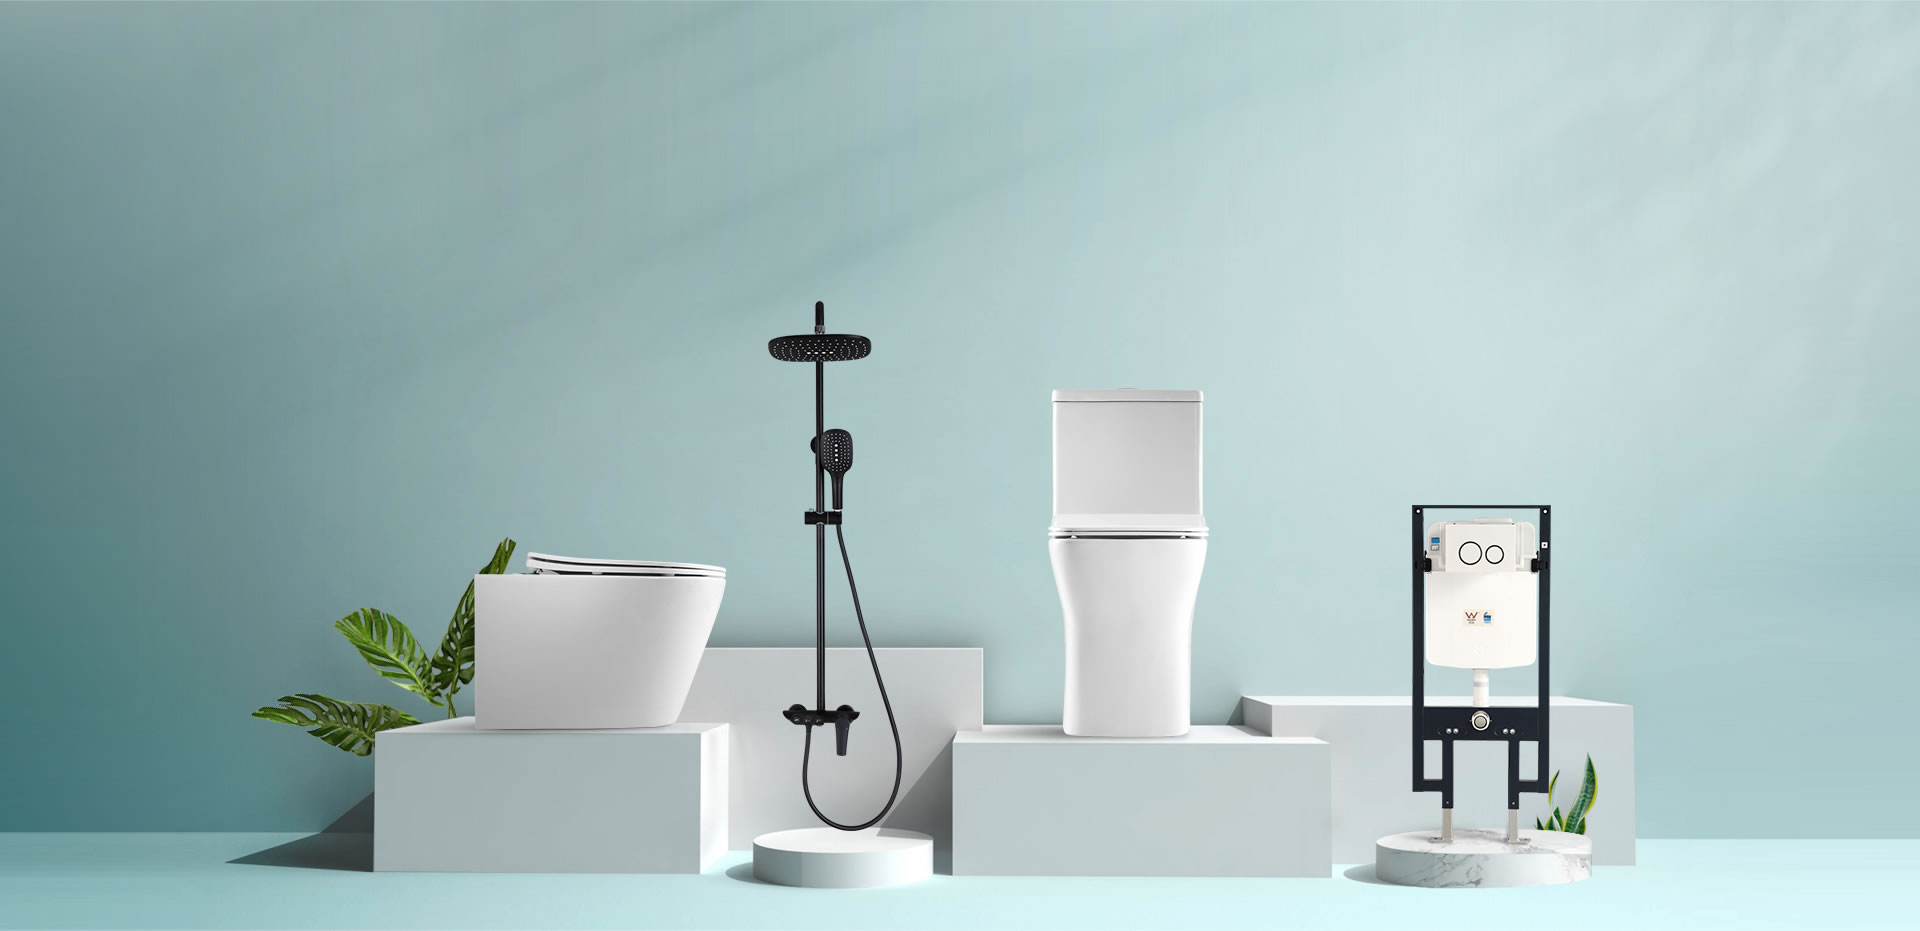 about us - SMOOW Sanitary Ware